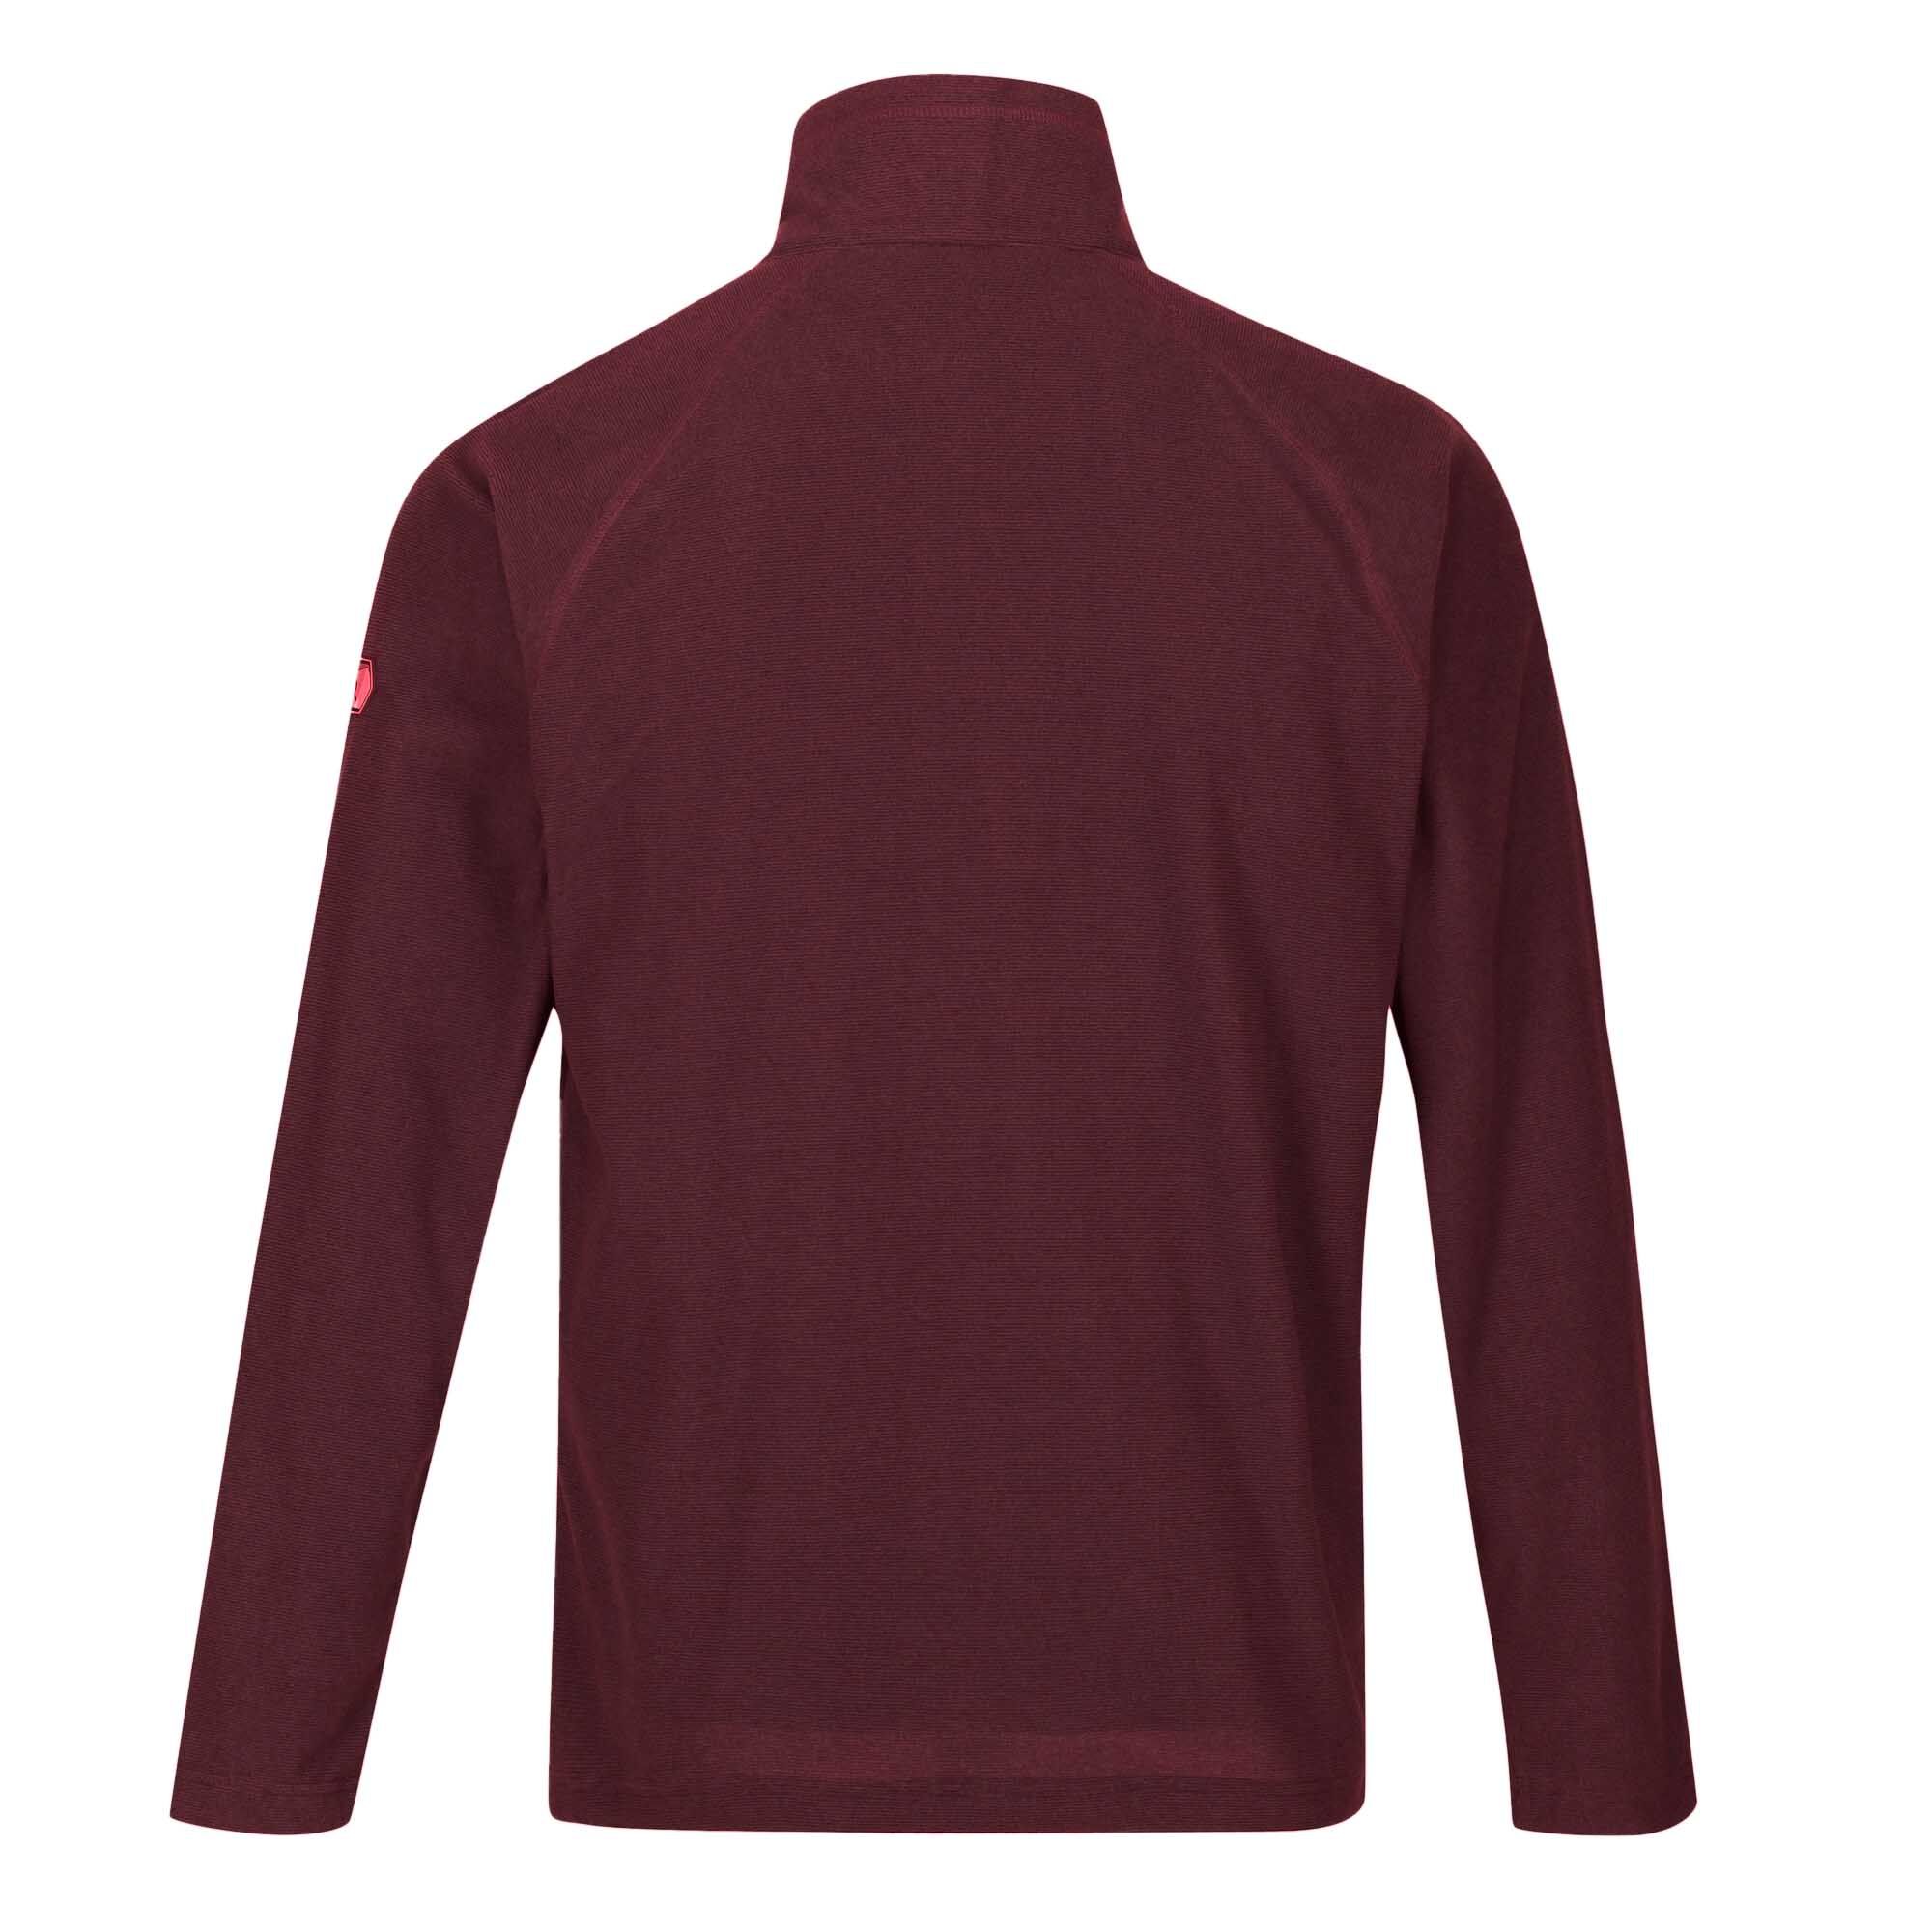 Mens half zip fleece top. Soft brushed back fabric. Regland sleeve design ensures mobility, while the funnel neck with a deep venting zip gives a snug fit. Fabric: 100% Polyester. Machine washable at 30c. Regatta Mens sizing (chest approx): XS (35-36in/89-91.5cm), S (37-38in/94-96.5cm), M (39-40in/99-101.5cm), L (41-42in/104-106.5cm), XL (43-44in/109-112cm), XXL (46-48in/117-122cm), XXXL (49-51in/124.5-129.5cm), XXXXL (52-54in/132-137cm), XXXXXL (55-57in/140-145cm).